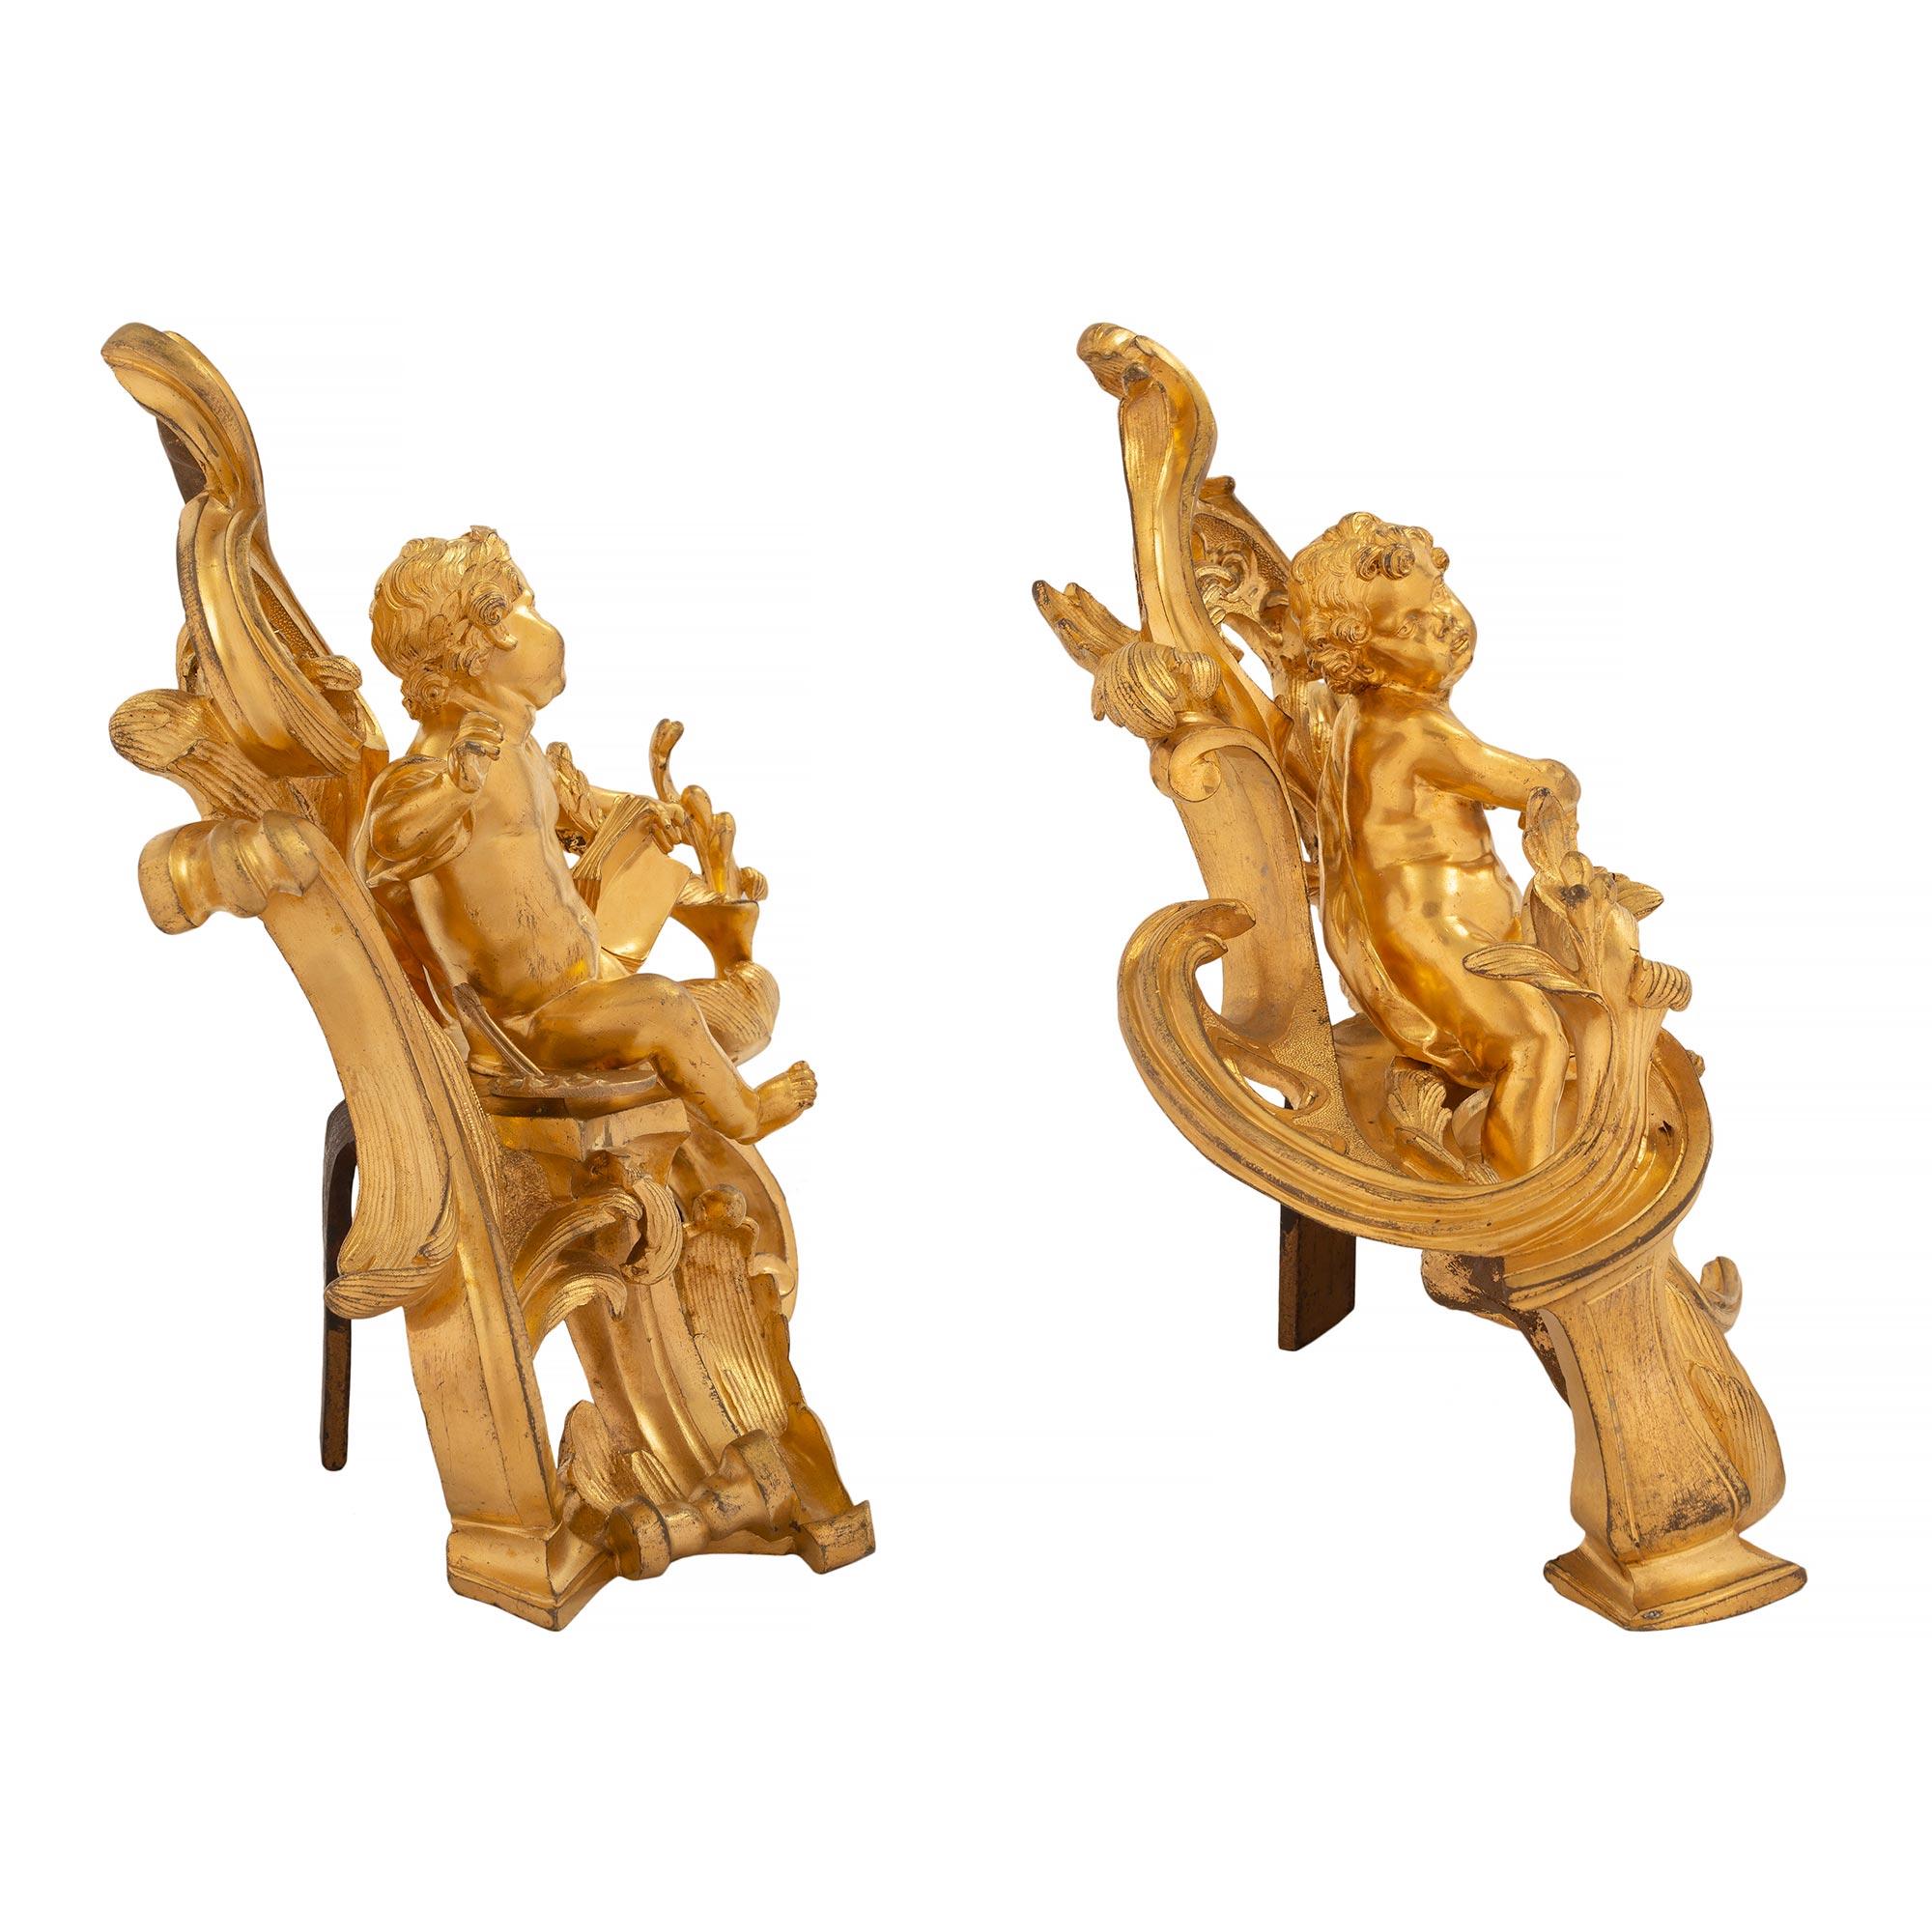 Pair of French Early 19th Century Louis XV Style Ormolu Andirons In Good Condition For Sale In West Palm Beach, FL